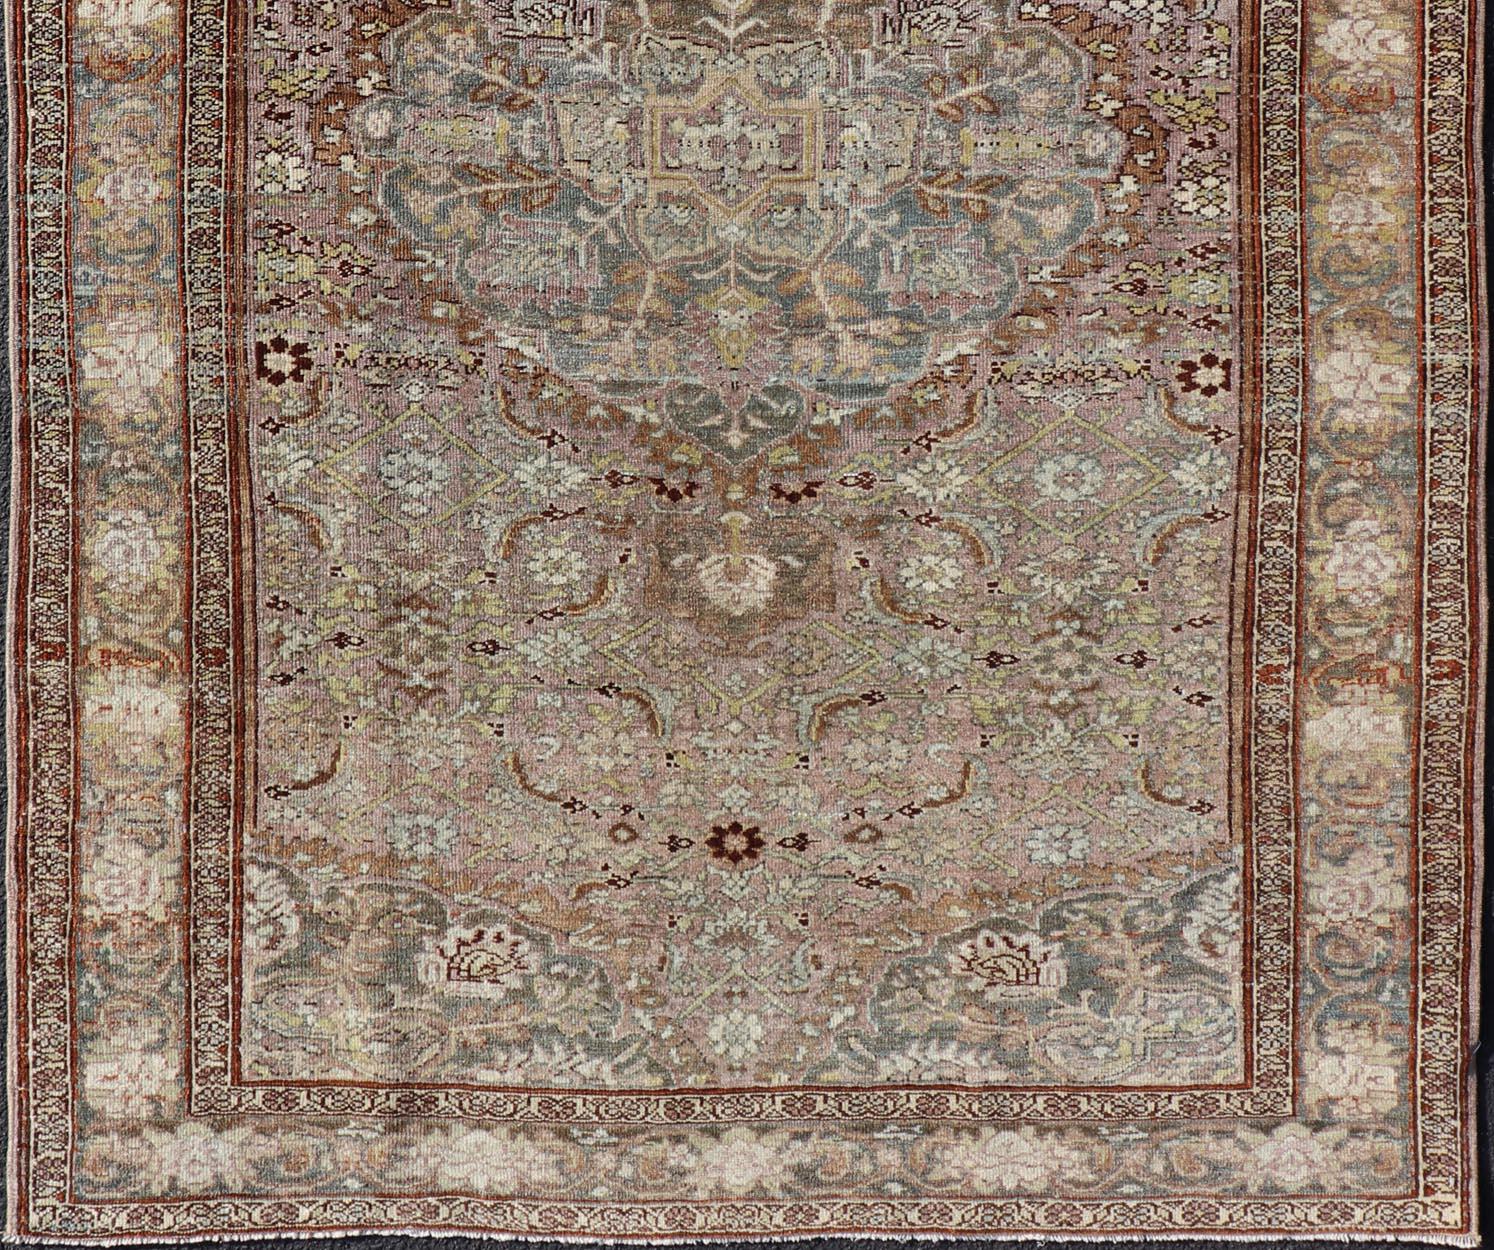 20th Century Antique Persian Bidjar Rug with Floral Medallion and All-Over Vining Floral For Sale